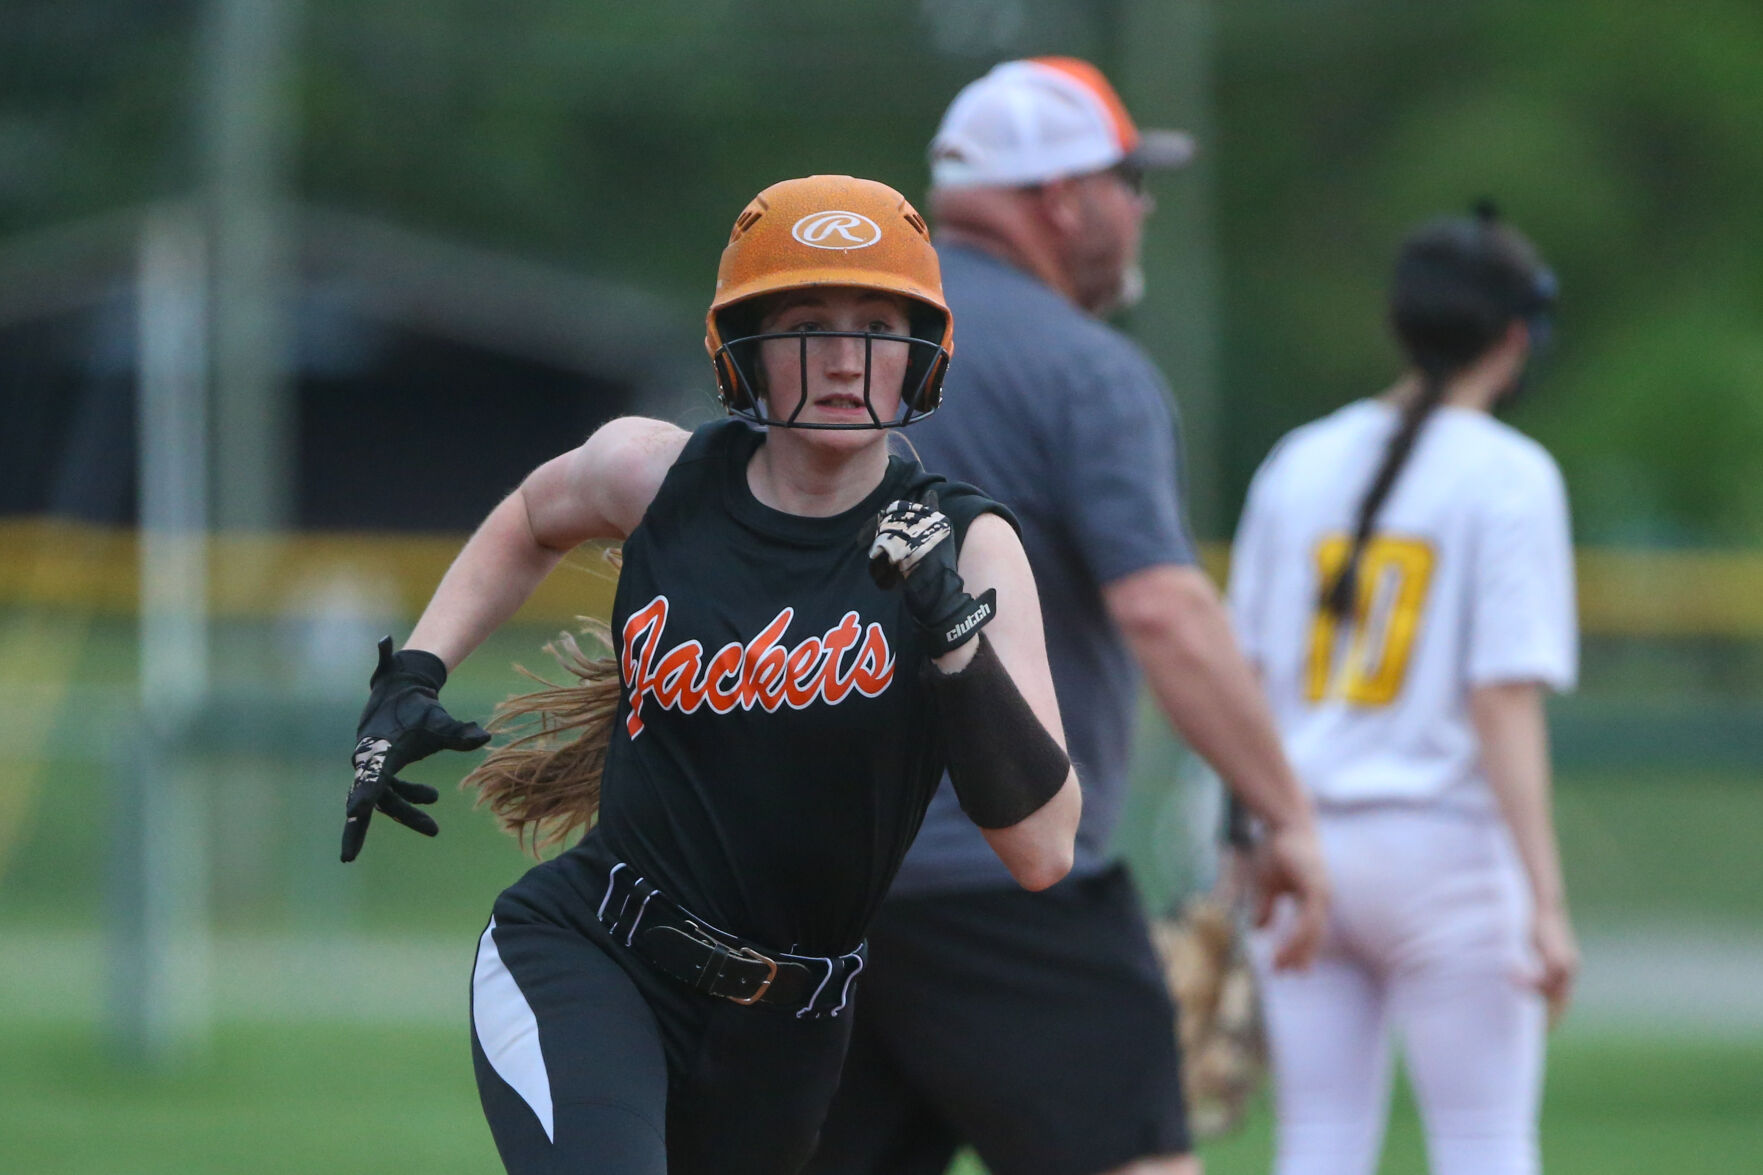 Two big innings by Leslie County leads to Williamsburg’s 18-1 loss